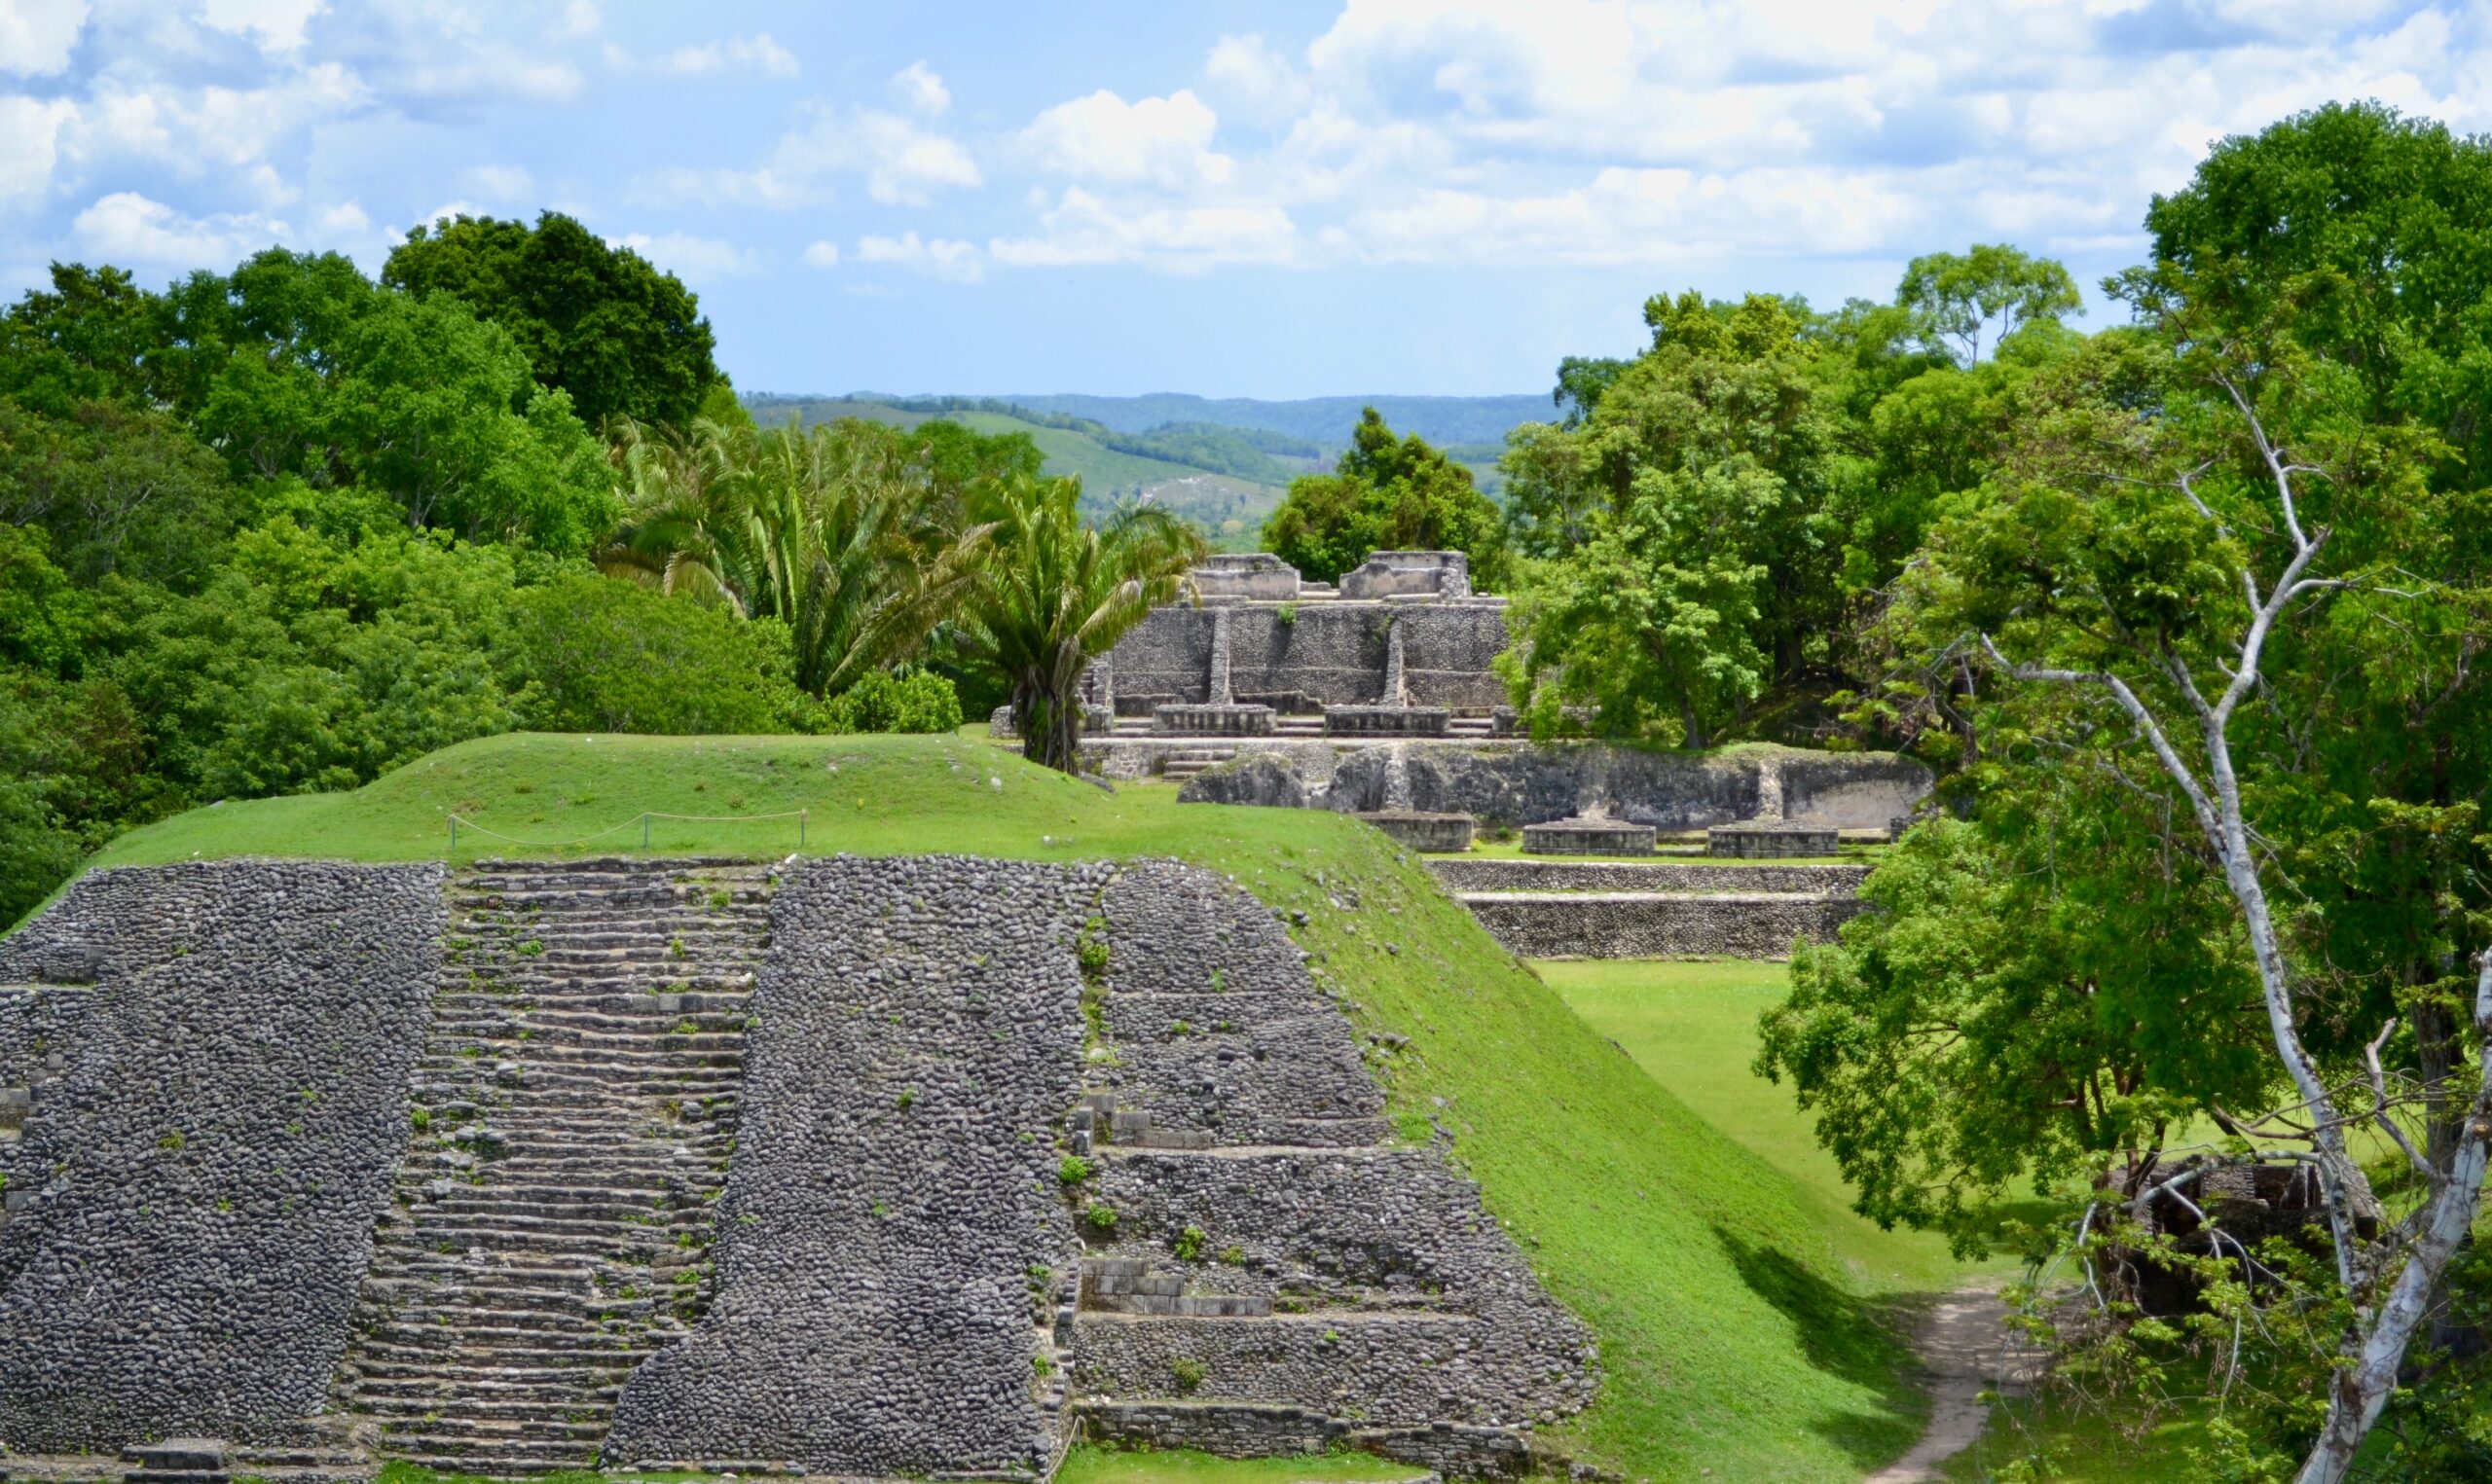 Belize is generally considered to be safe but there are ways travelers can make their trip even safer. 
pictured: the lush green hills of Belize and Mayan structures on a bright blue day